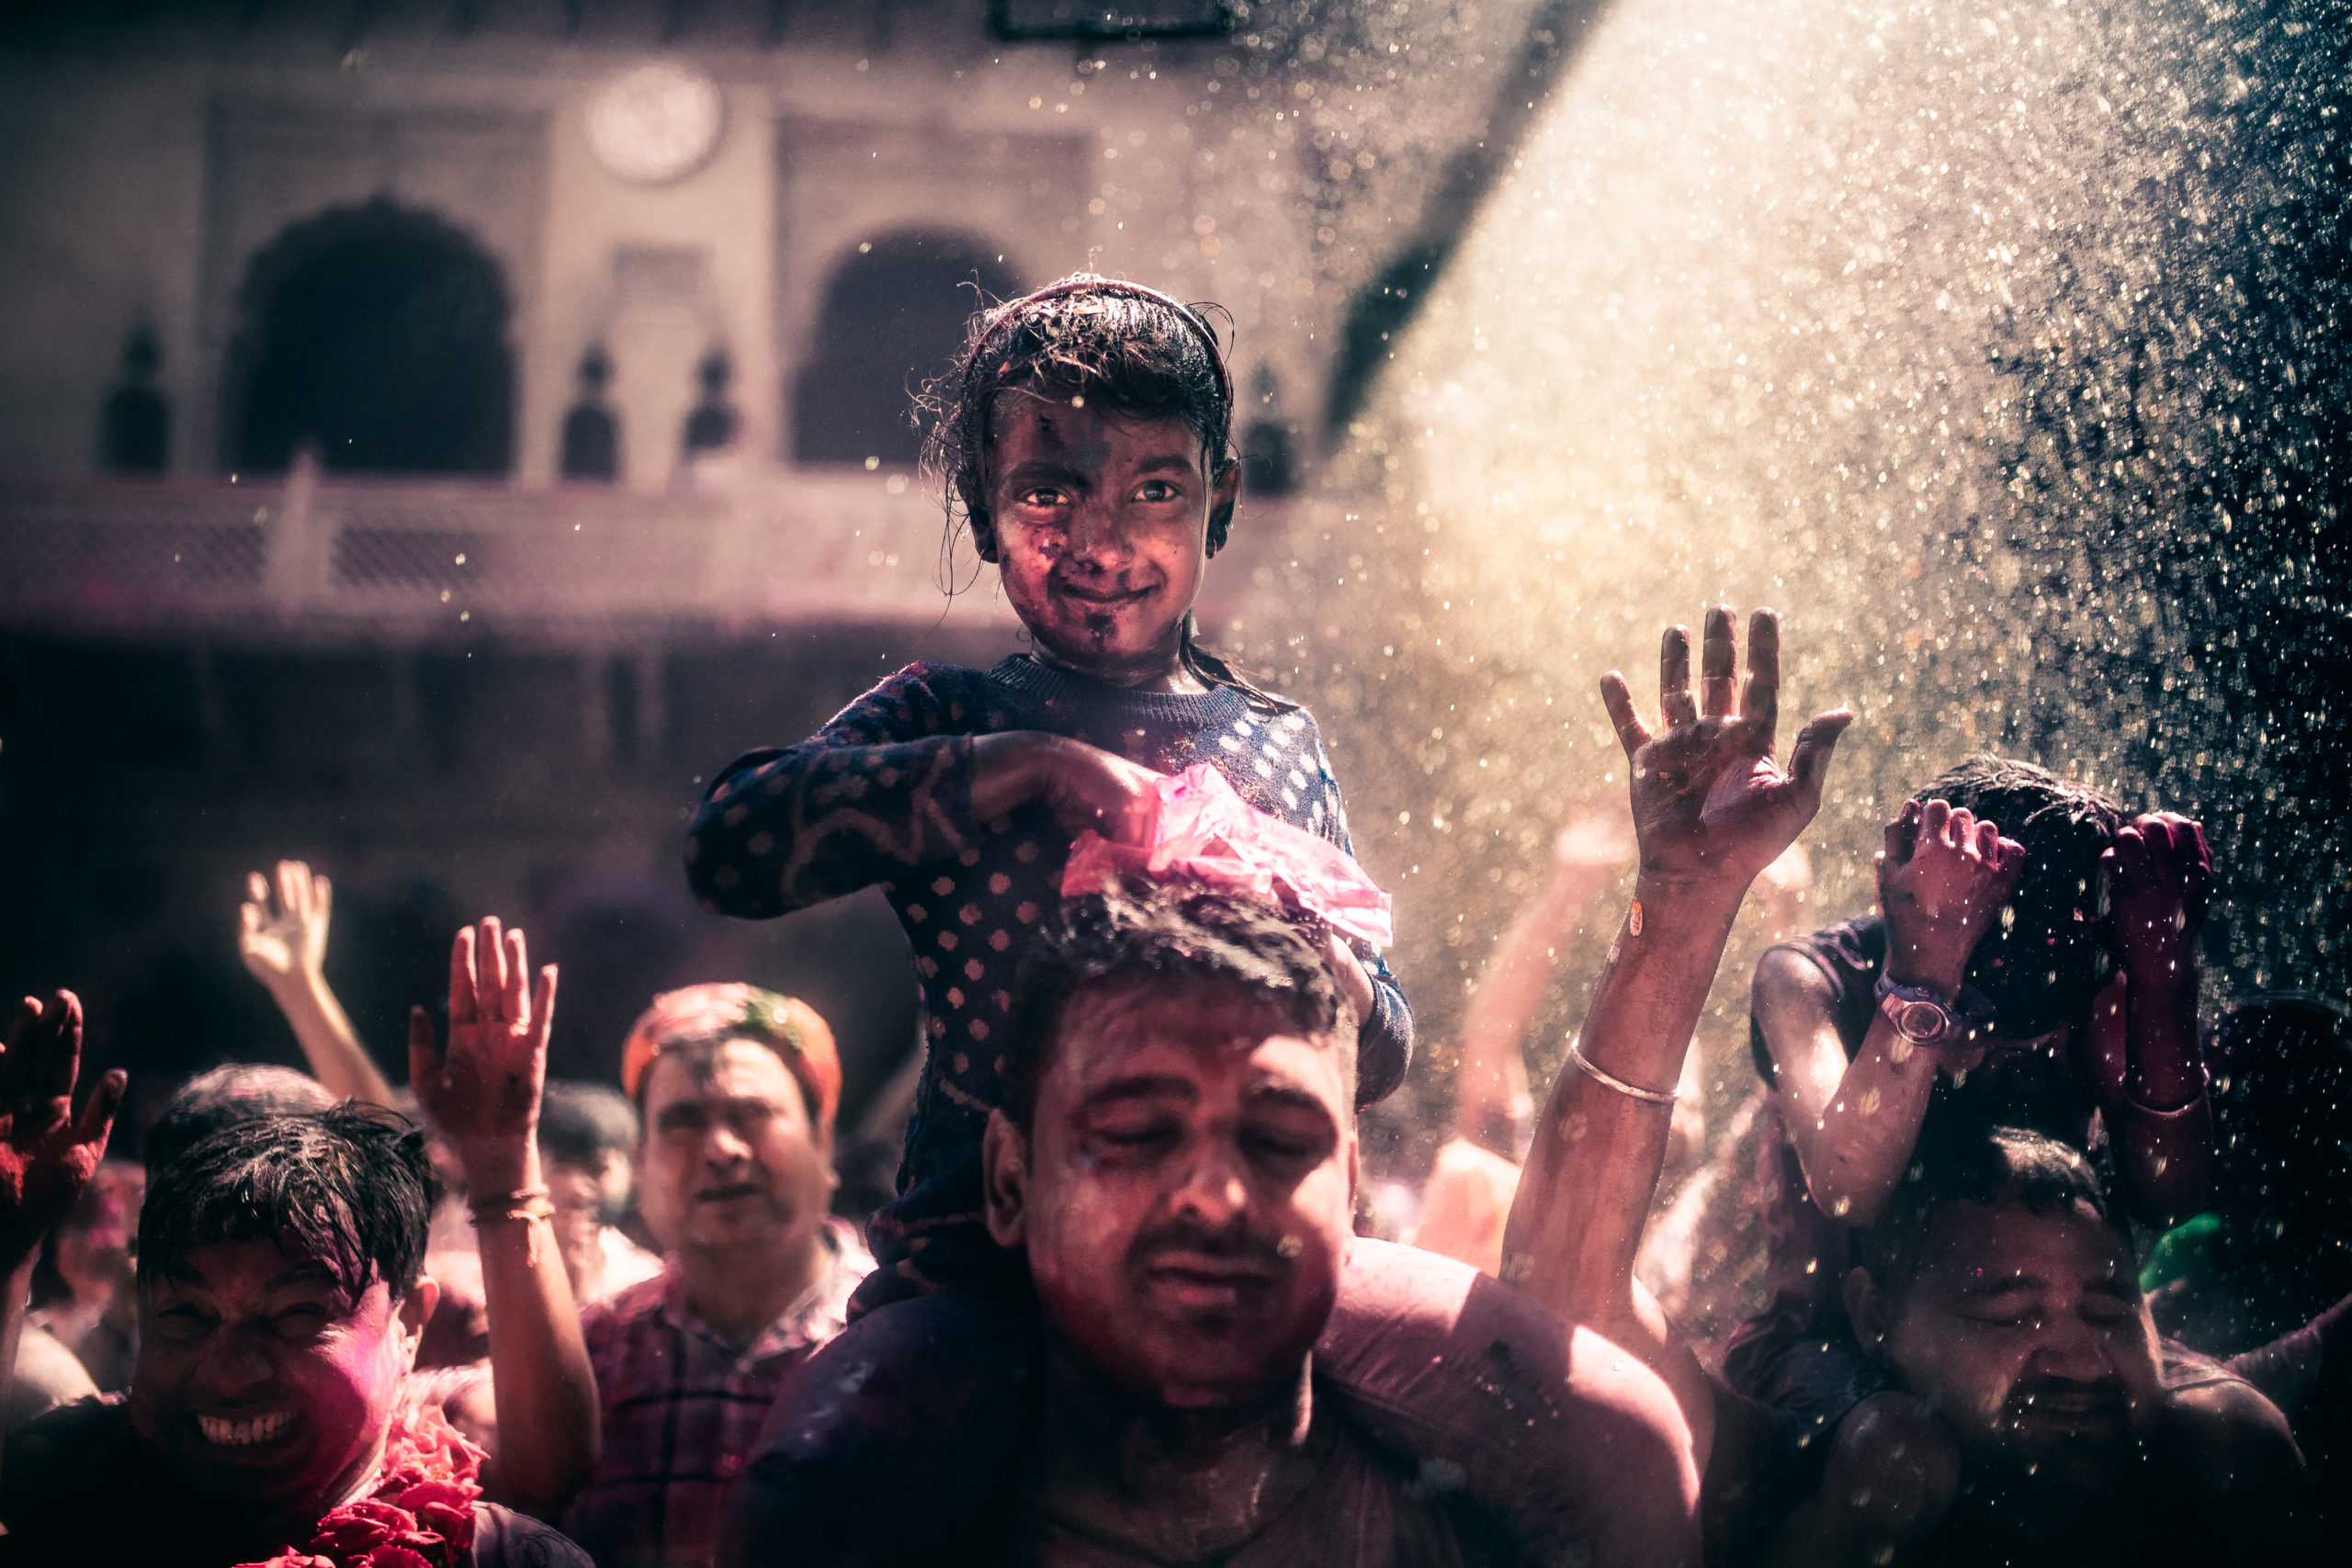 Street Photography of a young girl on her father's shoulders celebrating the Holi Festival of colors in Vrindivan, India